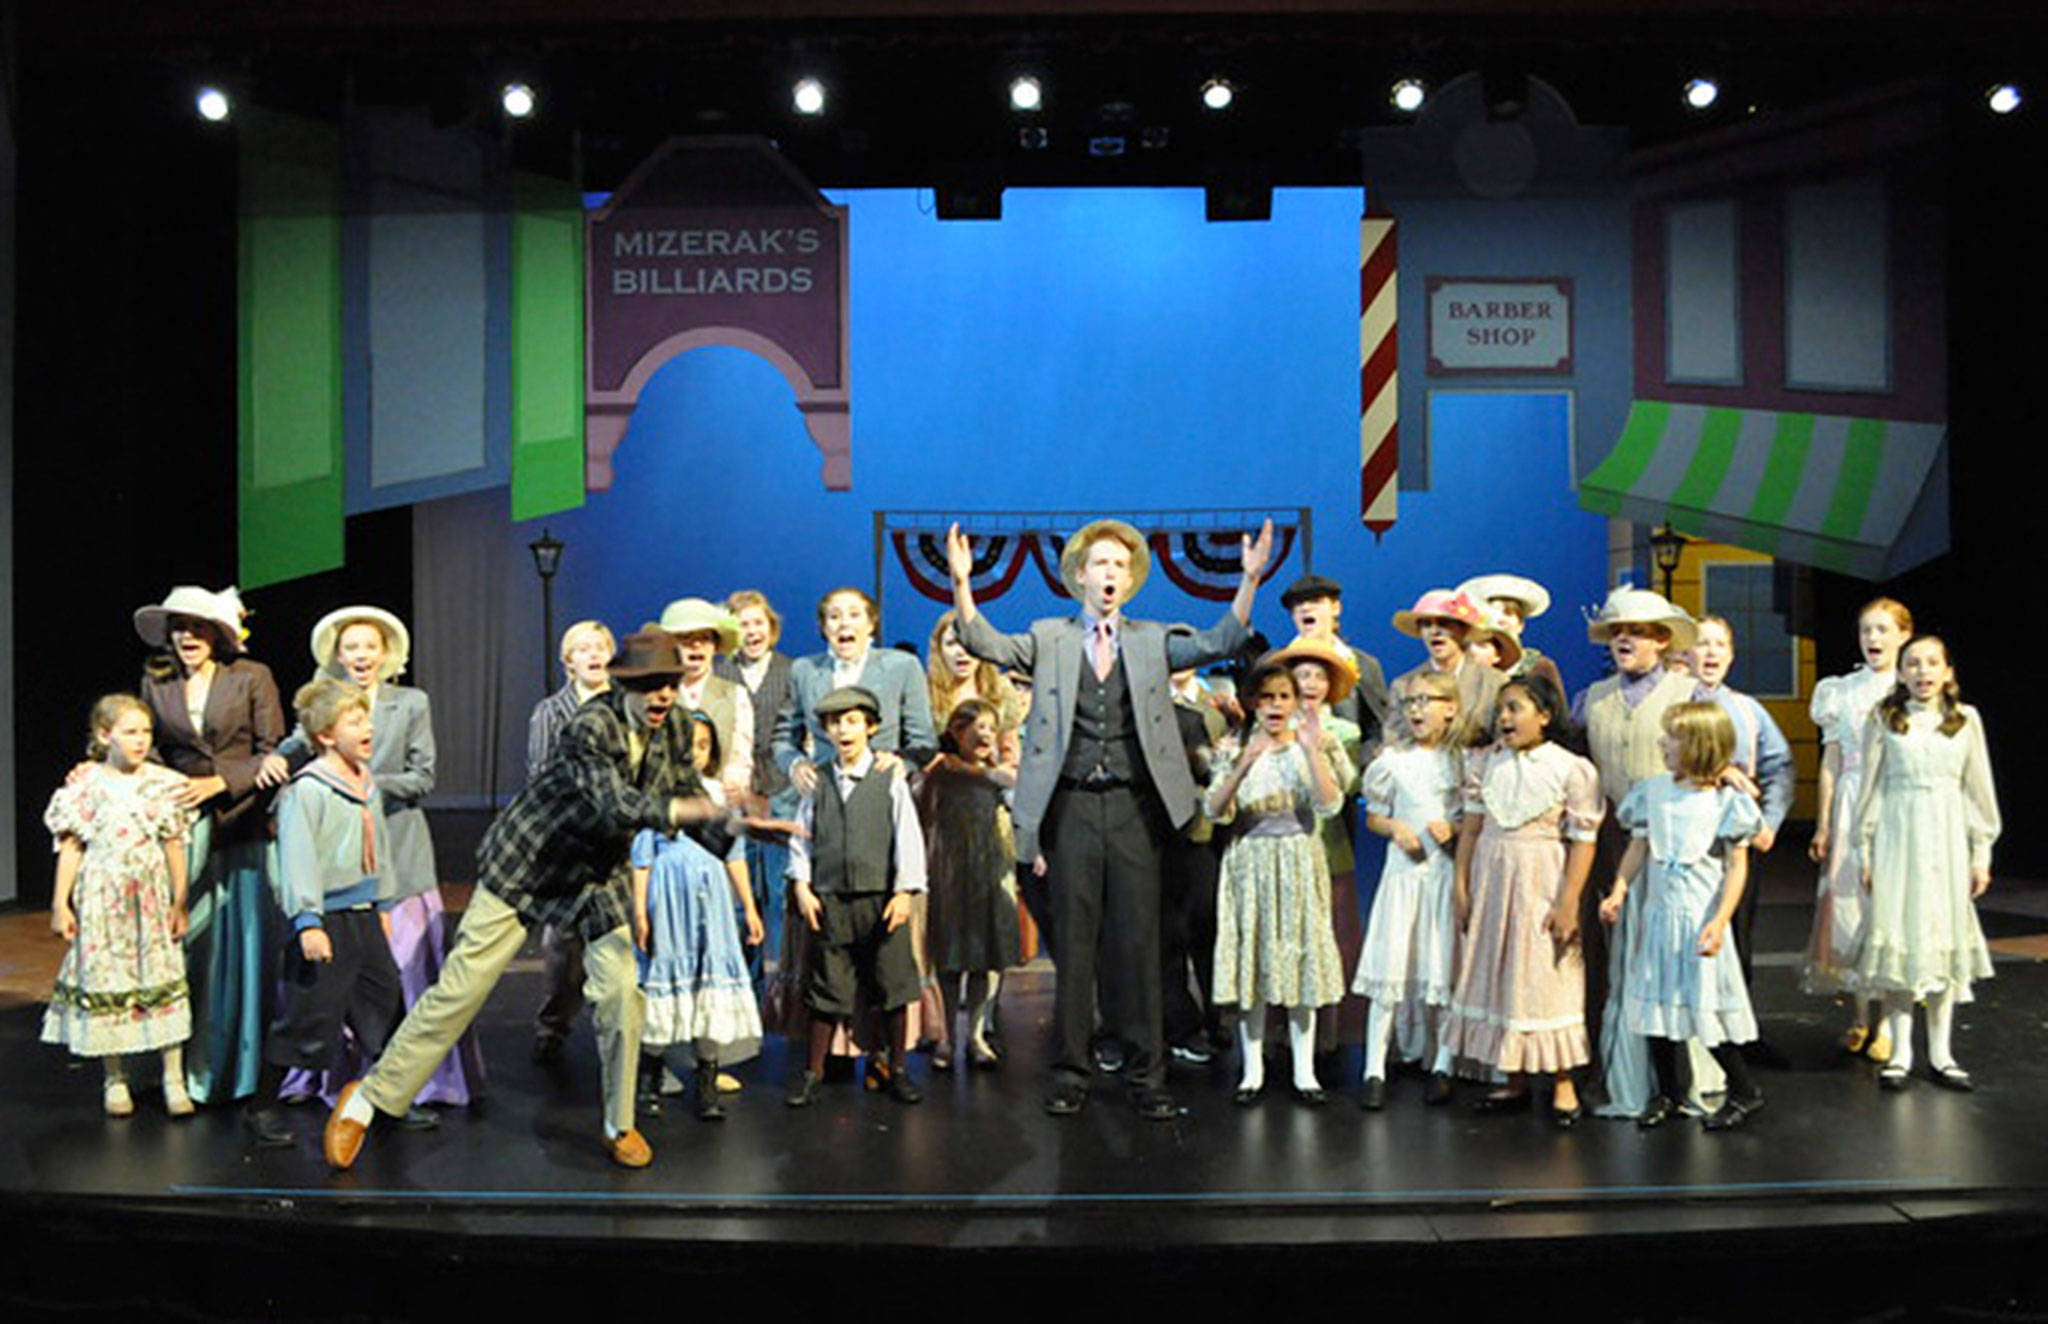 Youth Theatre Northwest will celebrate the closing weekend of “The Music Man Jr.” with a special event on July 30 honoring Islanders Harold and Mary Fran Hill. Harold Hill is also the name of the main character in the show. Photo courtesy of YTN